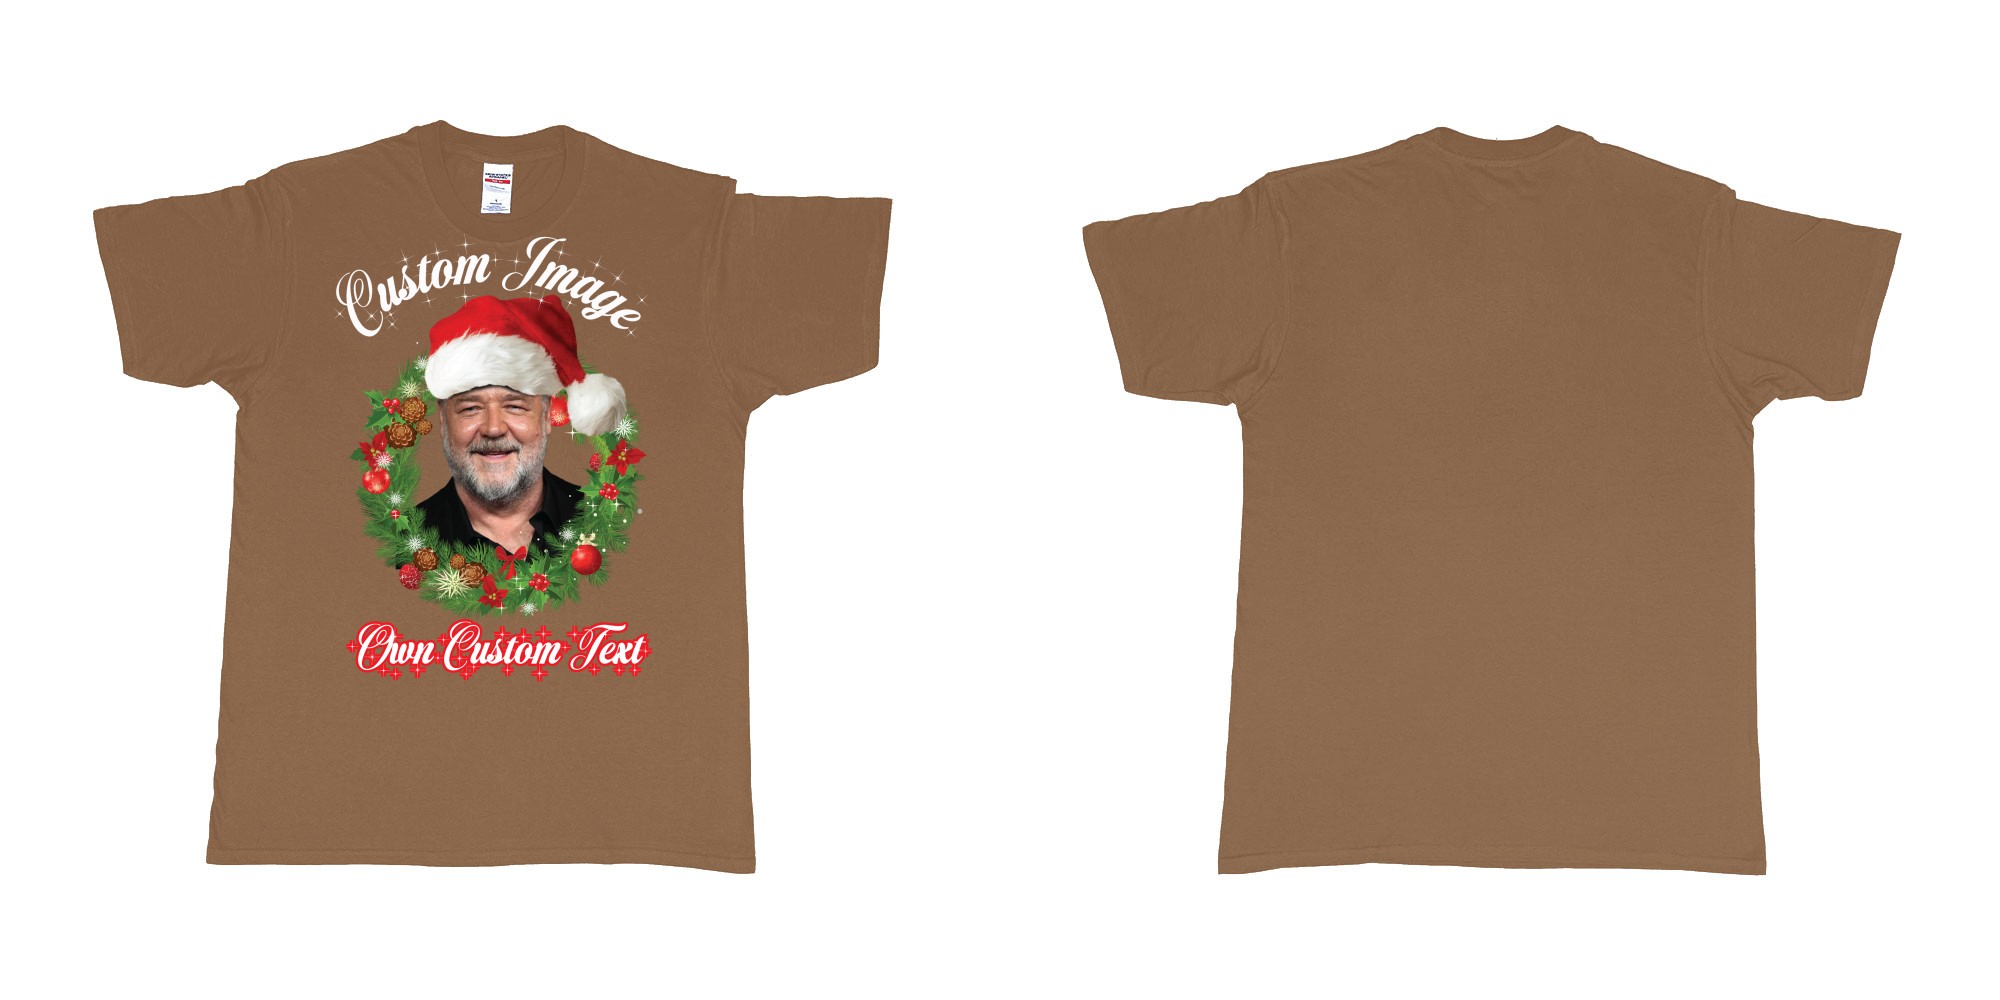 Custom tshirt design christmas wreath custom face image text in fabric color chestnut choice your own text made in Bali by The Pirate Way